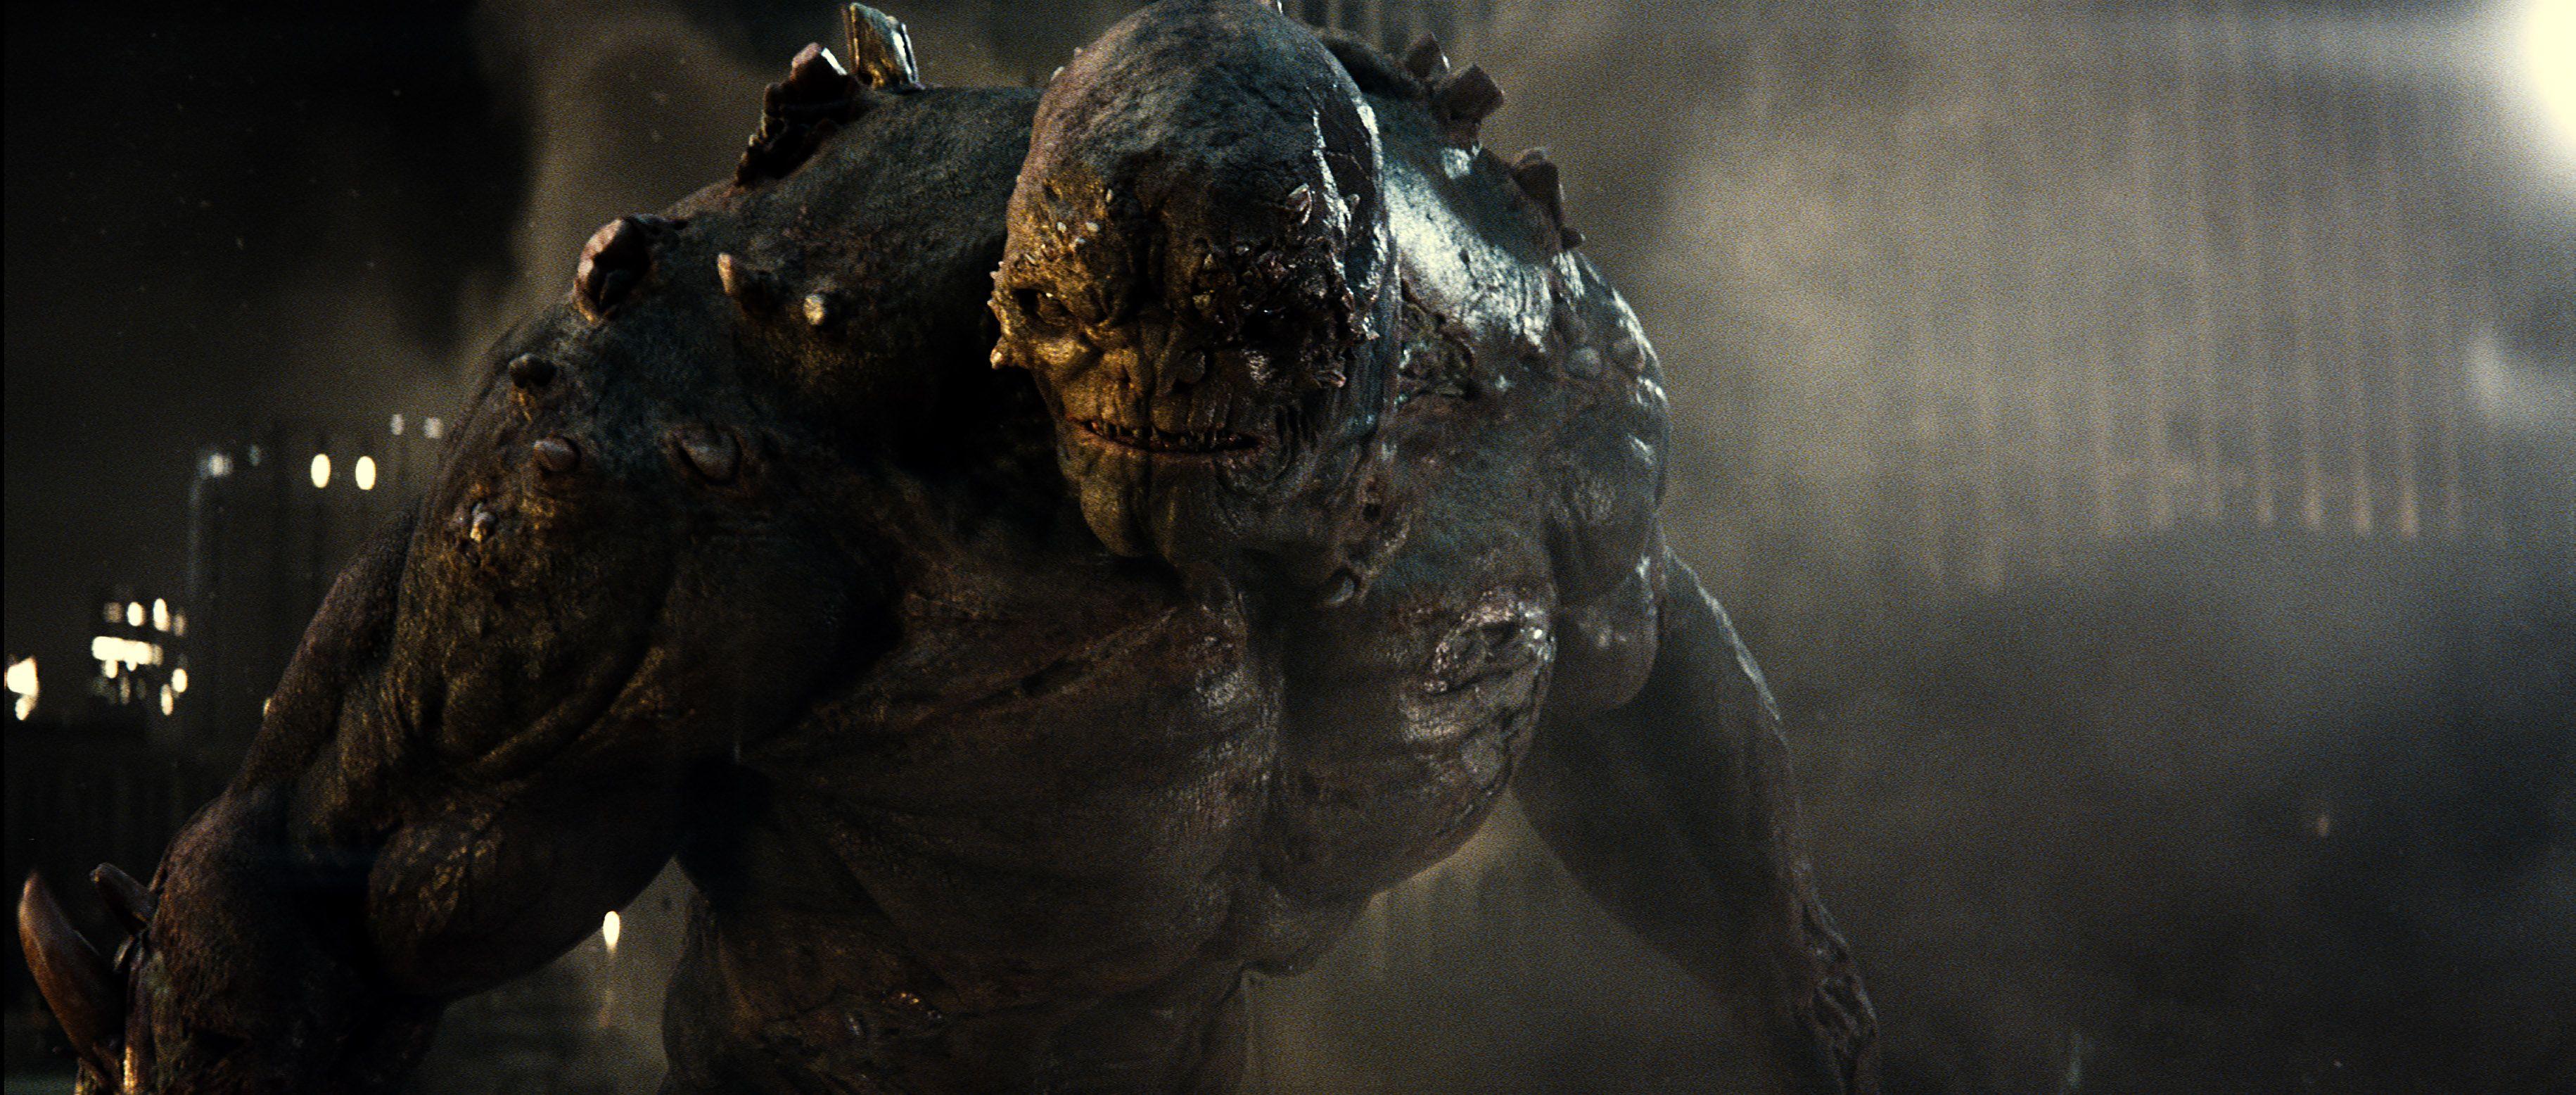 Doomsday (DC Comics) HD Wallpaper and Background Image